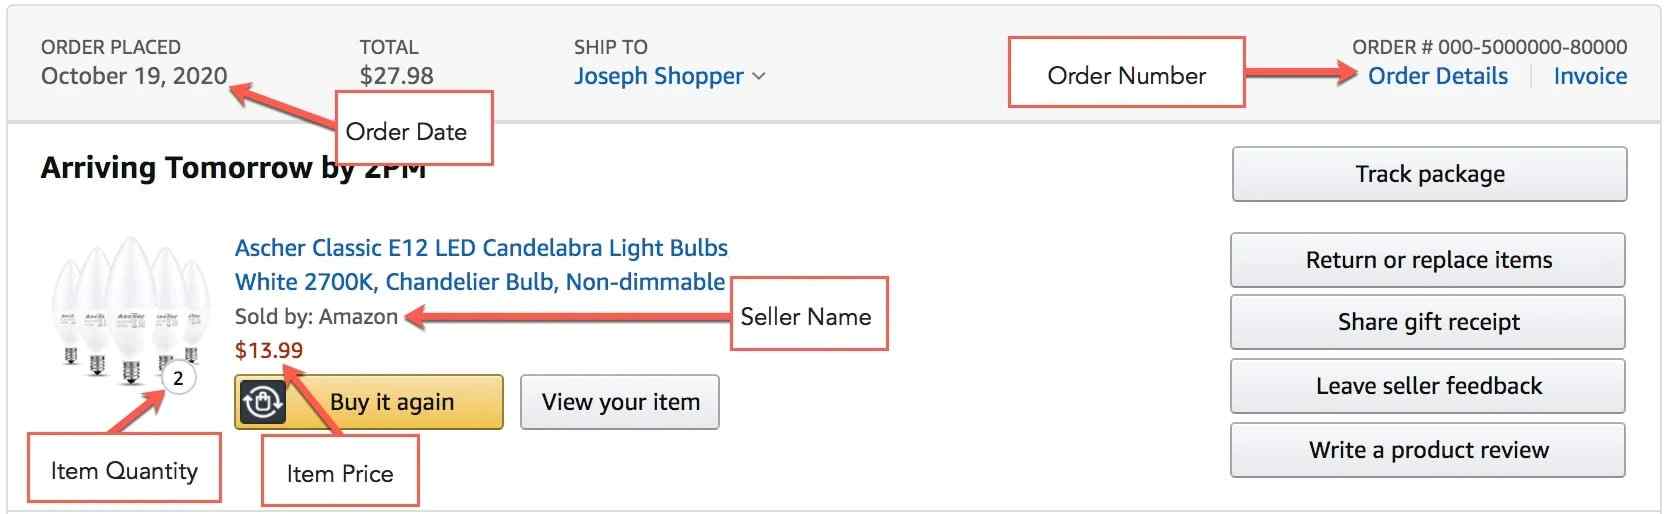 Examples of order confirmation from Amazon